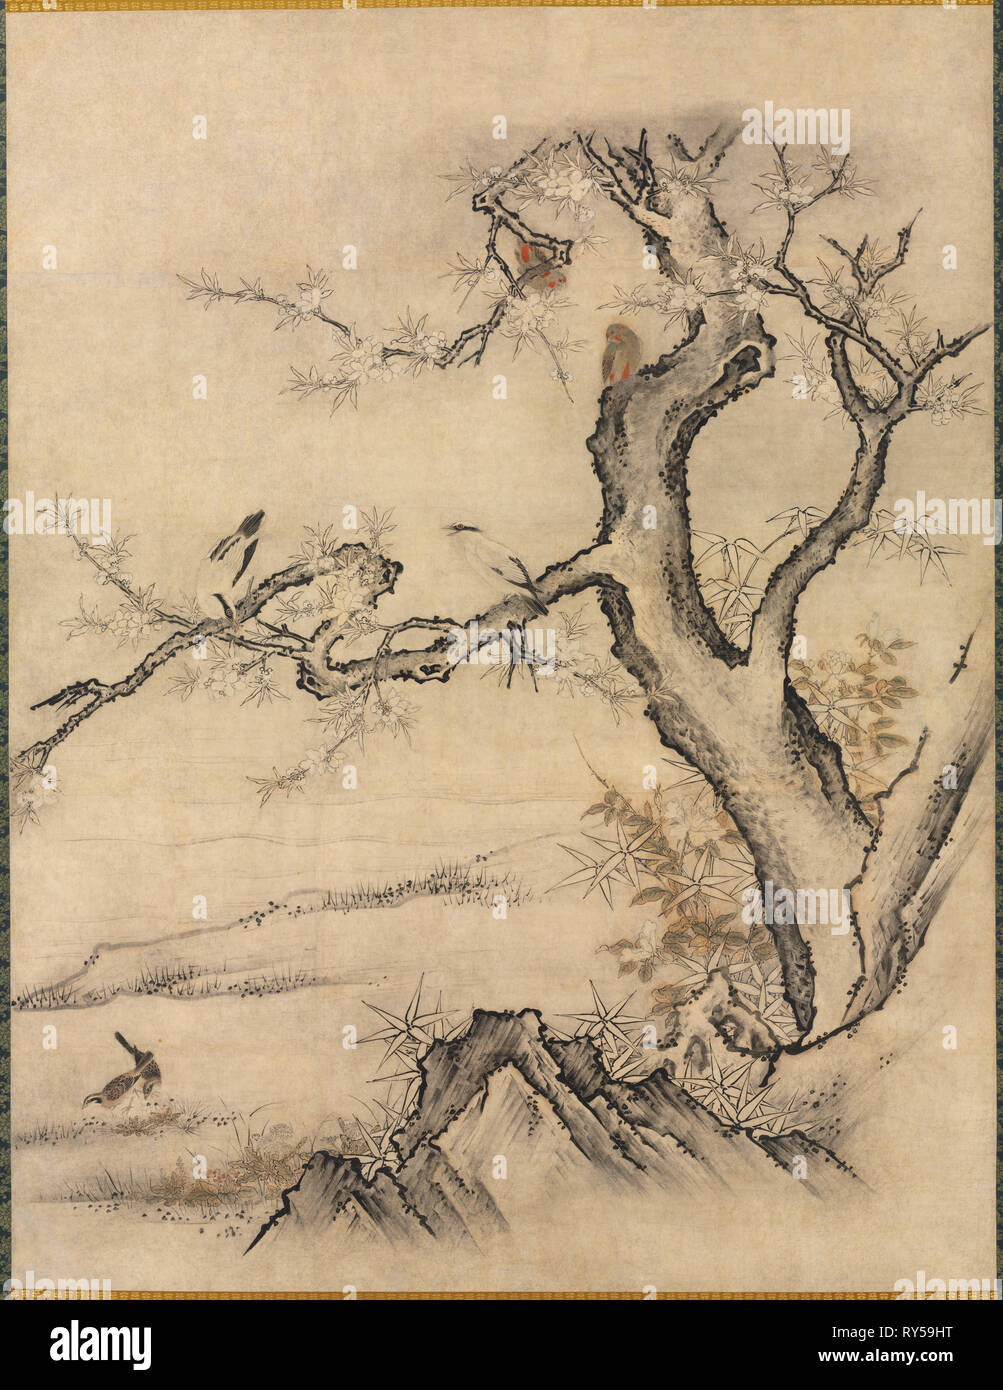 Flowers and Birds in a Spring Landscape, 1500s. Attributed to Kano Motonobu (Japanese, c. 1476-1559). Fusuma panel mounted as a hanging scroll; ink and color on paper Stock Photo